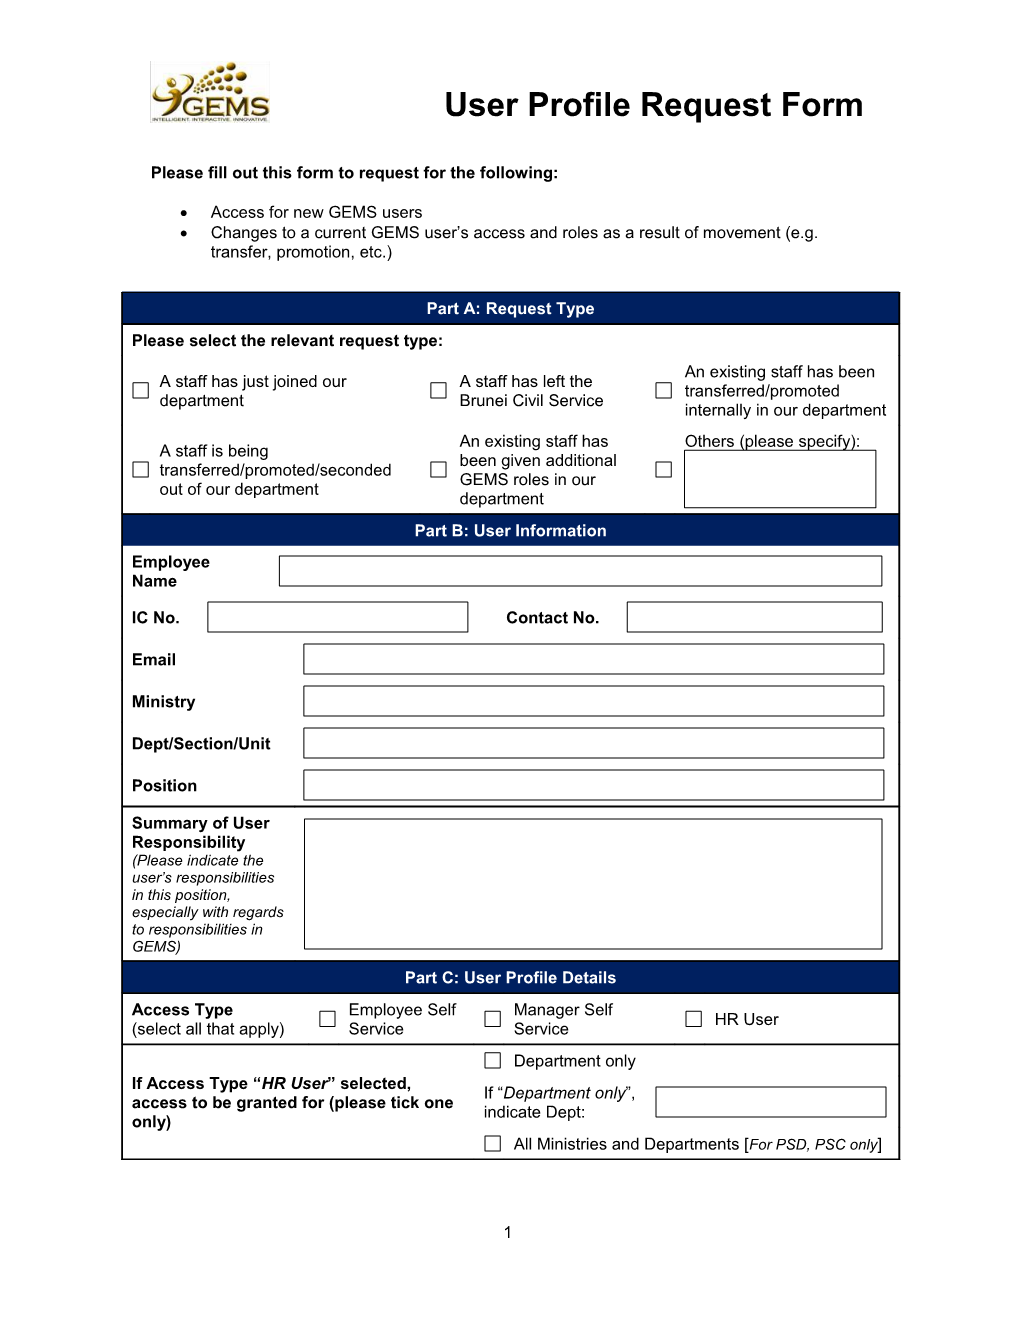 Please Fill out This Form to Request for the Following